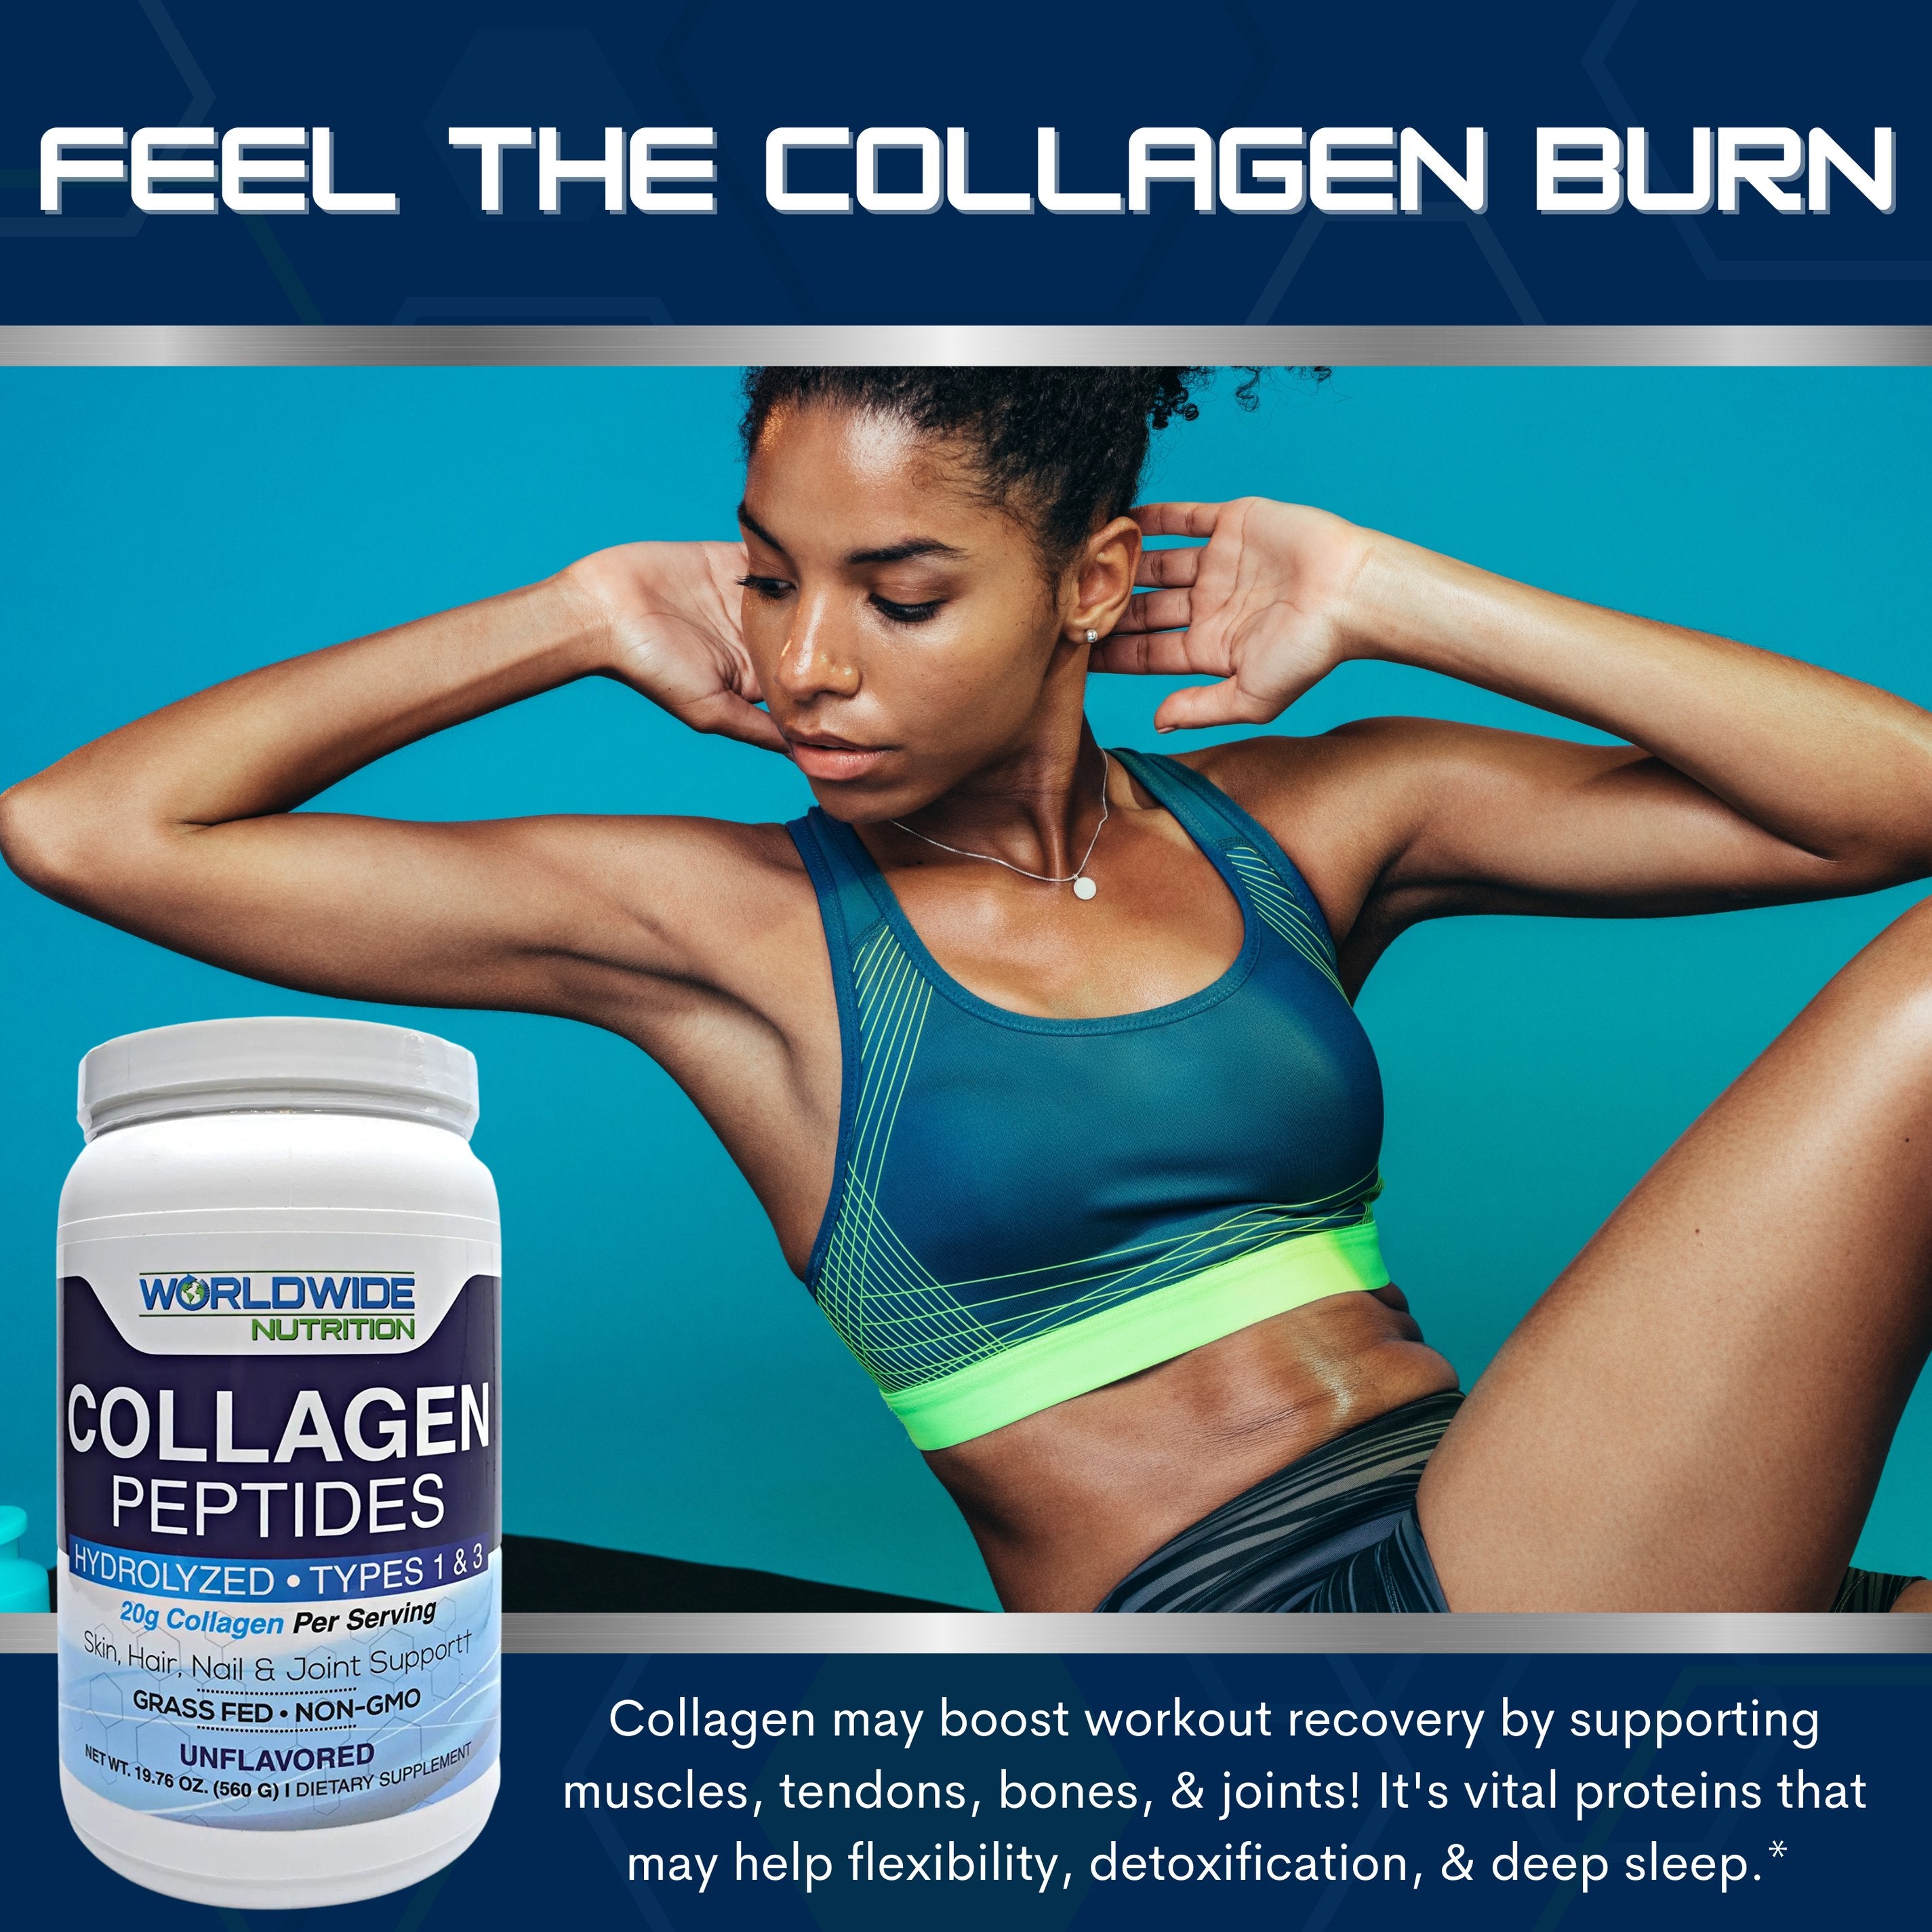 Worldwide Nutrition Collagen Peptides - Hydrolyzed Collagen 1 and 3 - Skin, Hair, Nail, and Joint Support - Grass Fed, Gluten Free, Non GMO, and Keto Collagen - Odorless Unflavored Collagen - 28 Serv.